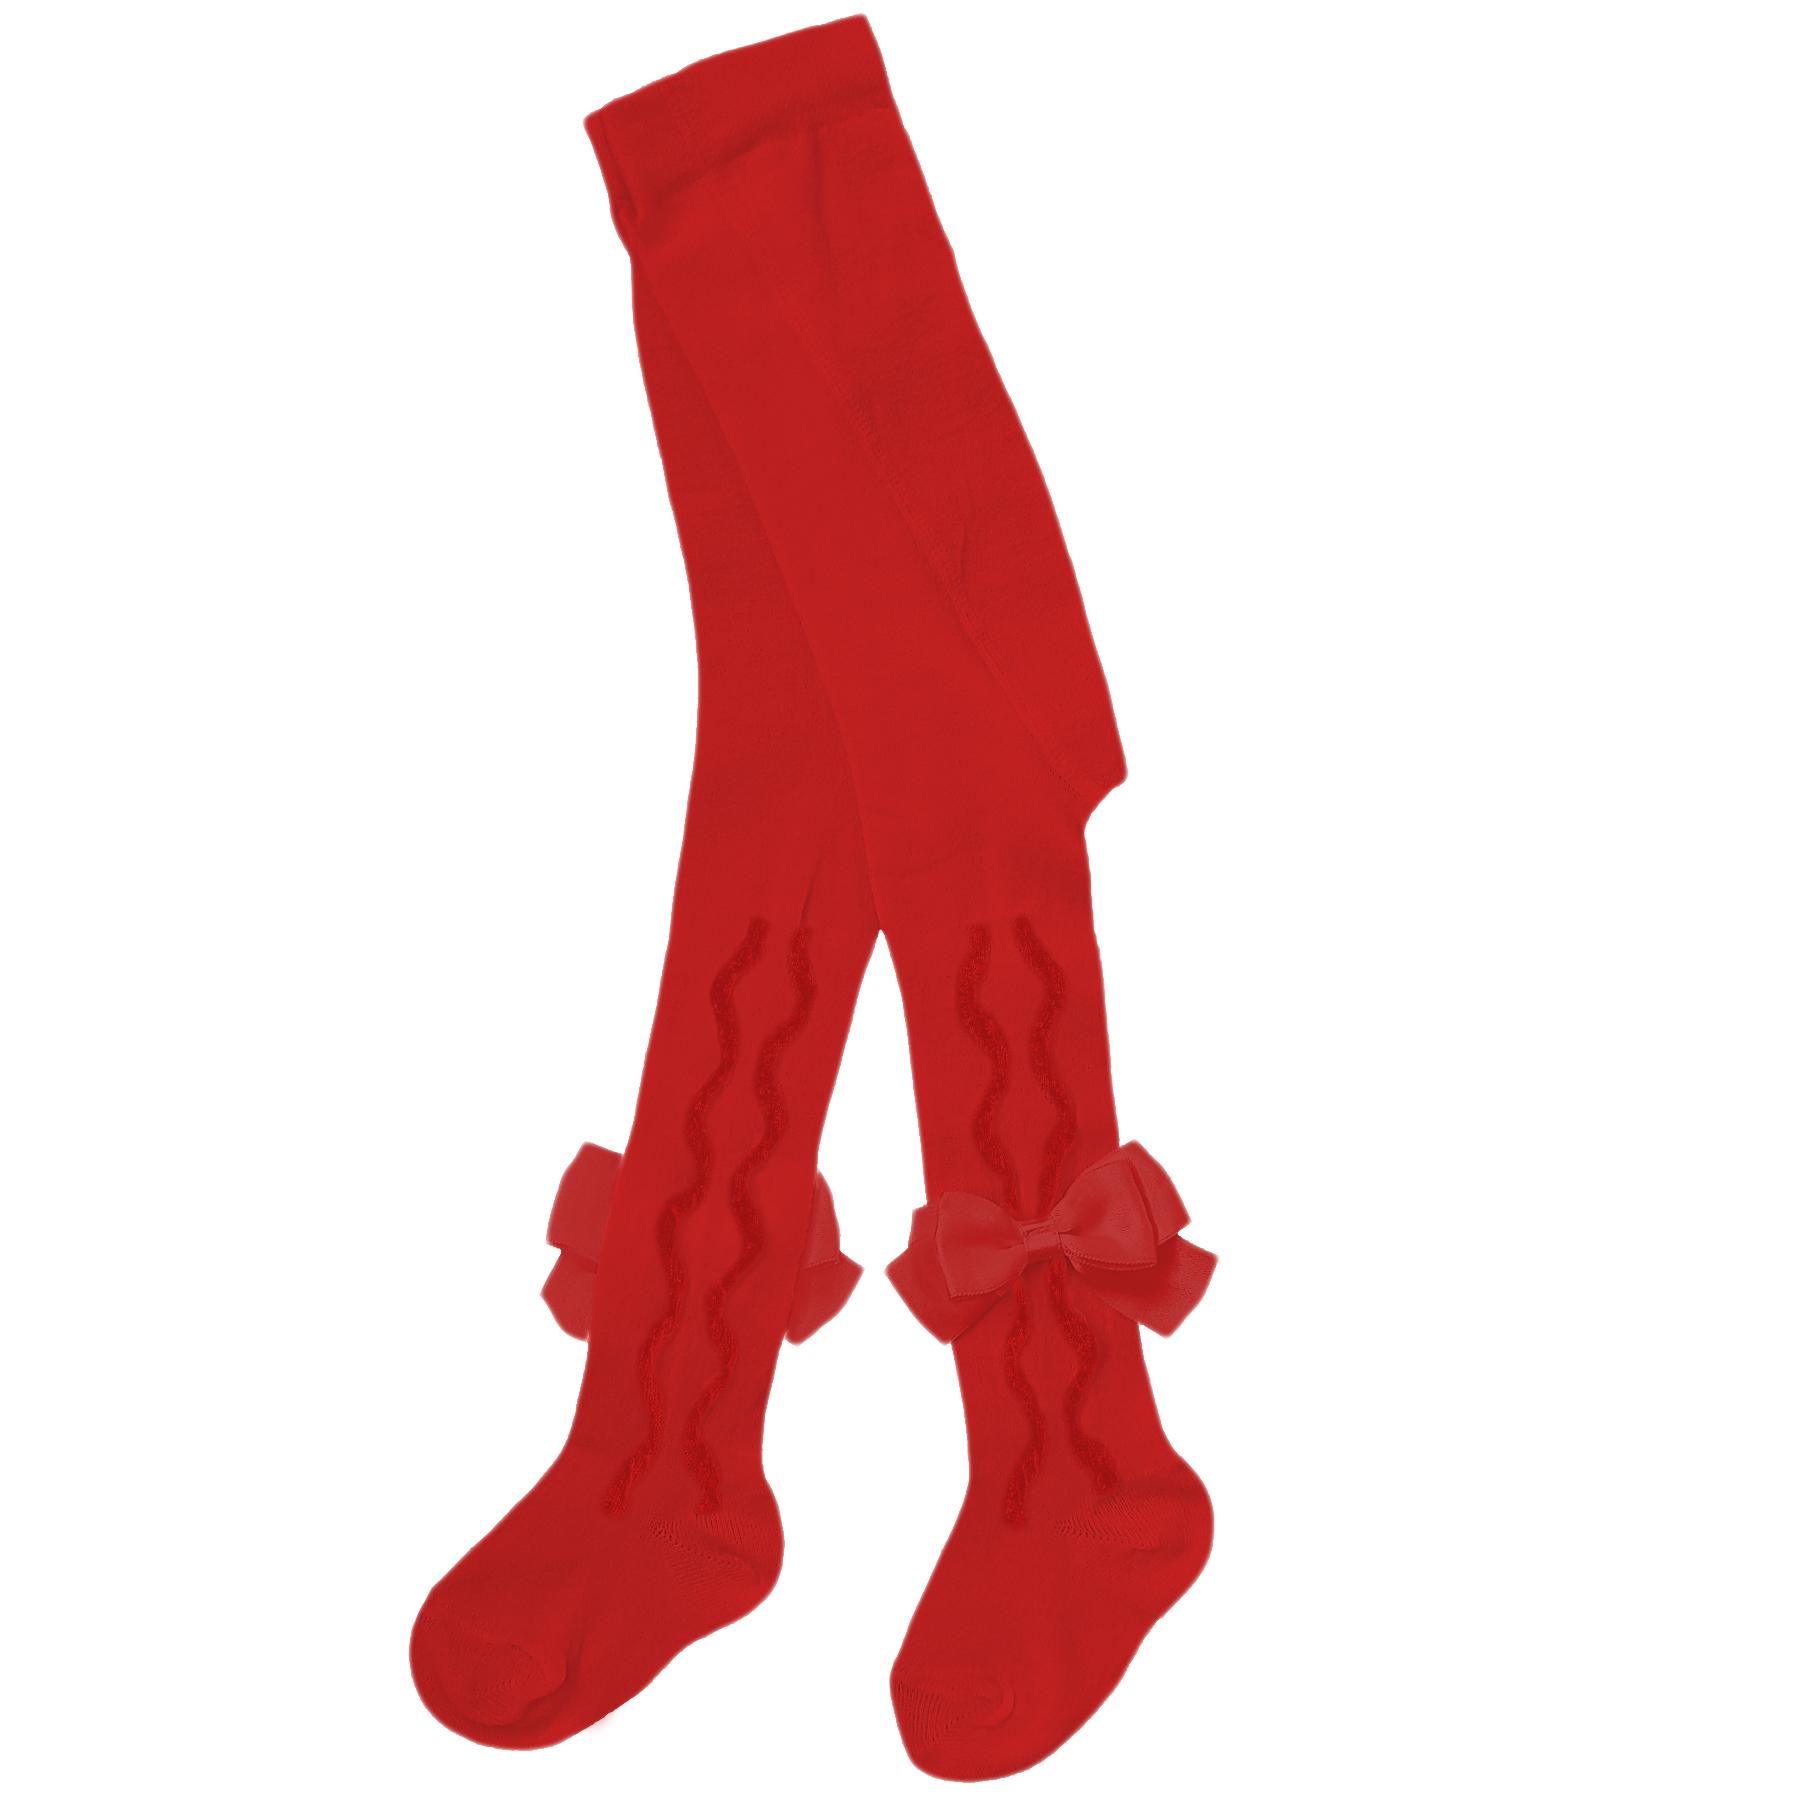 Pex Kids Grazia Tights with Side Ruffles & Bows In Red